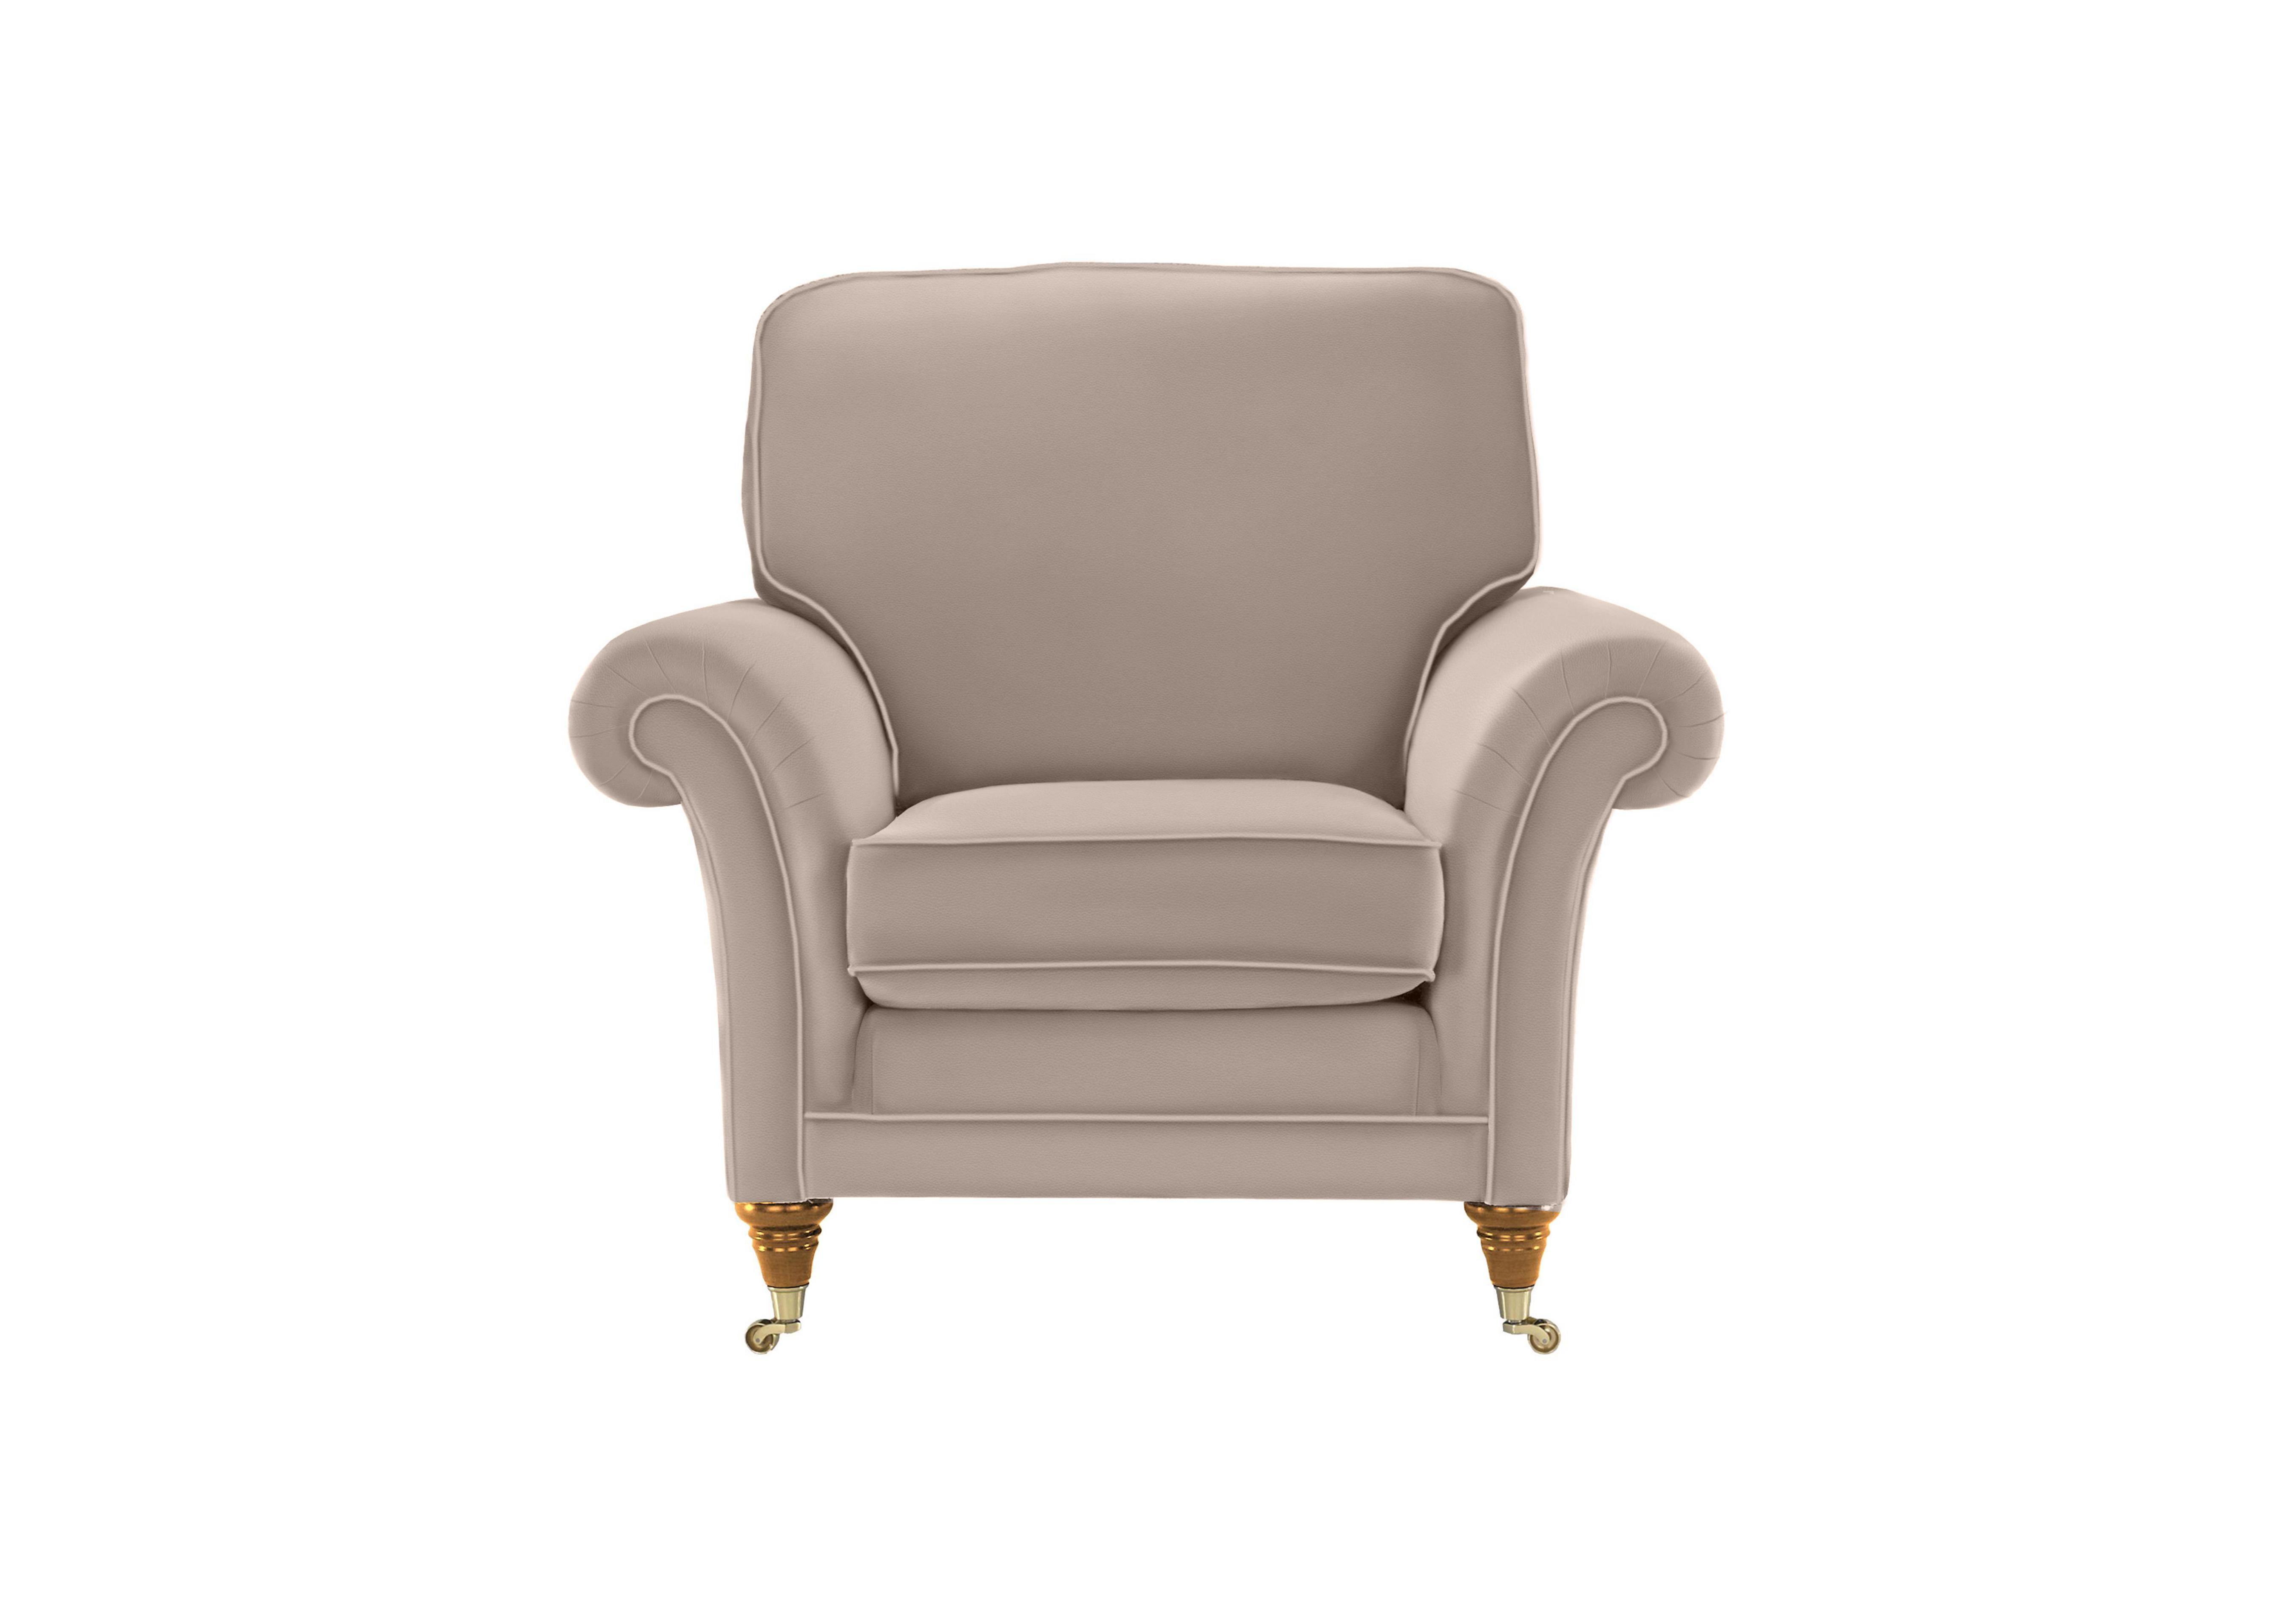 Burghley Leather Chair in 009019-0056 Roma Putty on Furniture Village